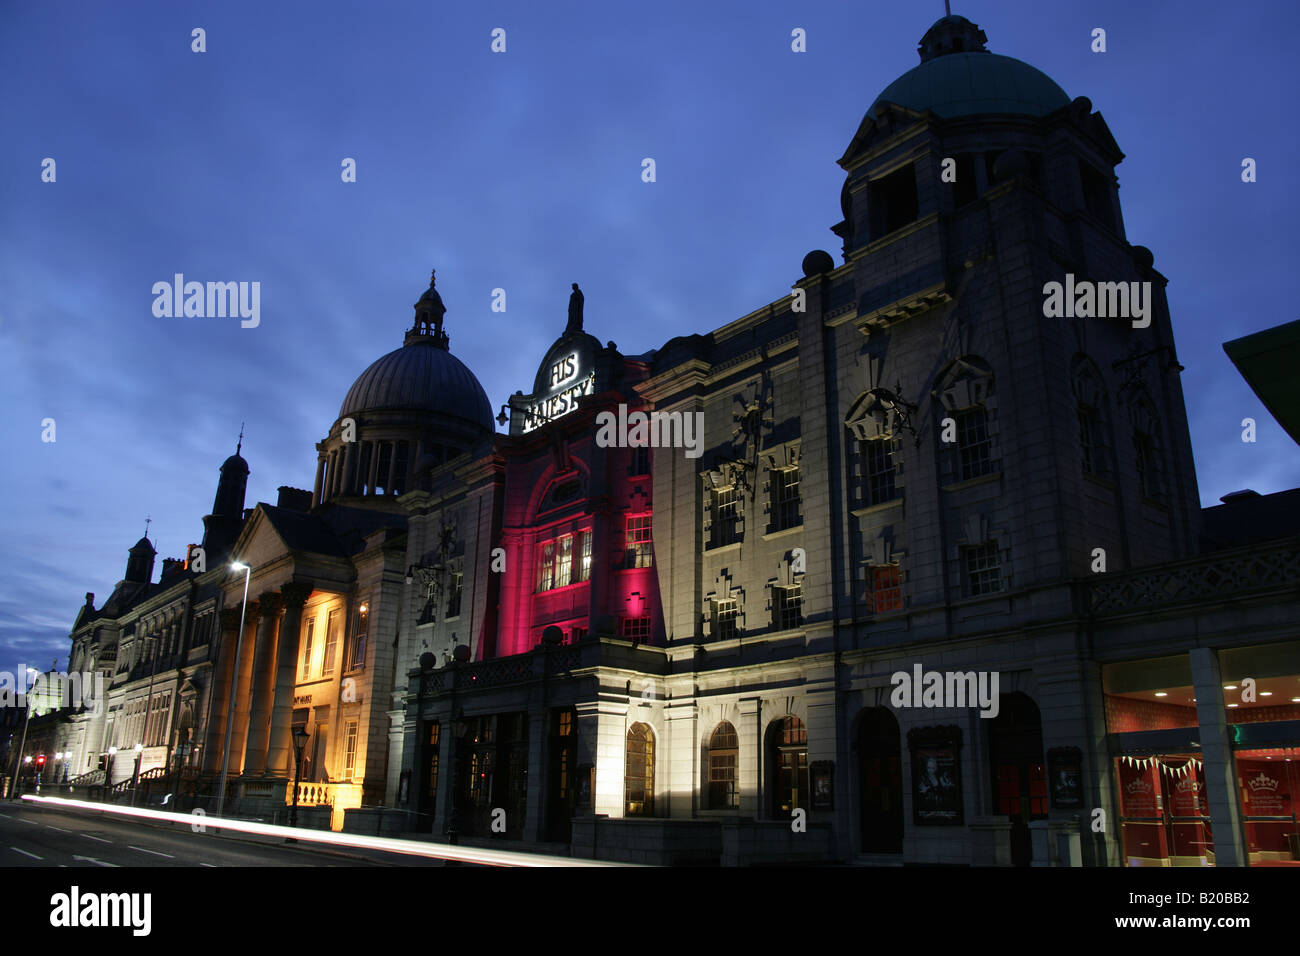 City of Aberdeen, Scotland. Evening view of Rosemount Viaduct with His Majesty’s Theatre, St Mark’s Church and the city library. Stock Photo